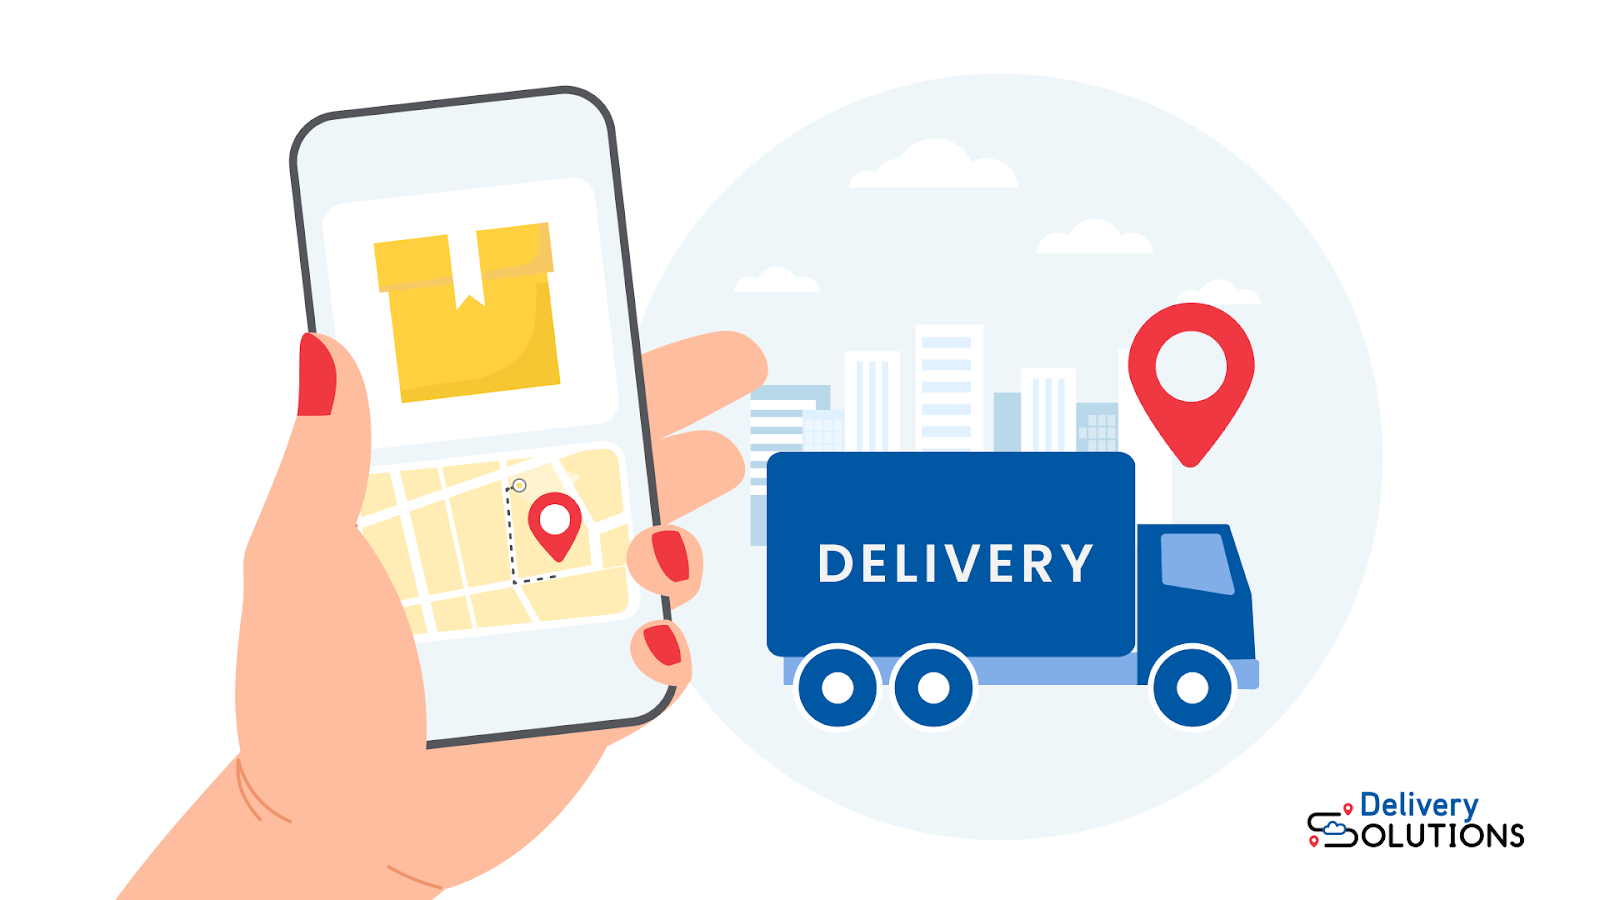 Retailers risk inefficient deliveries with a single carrier